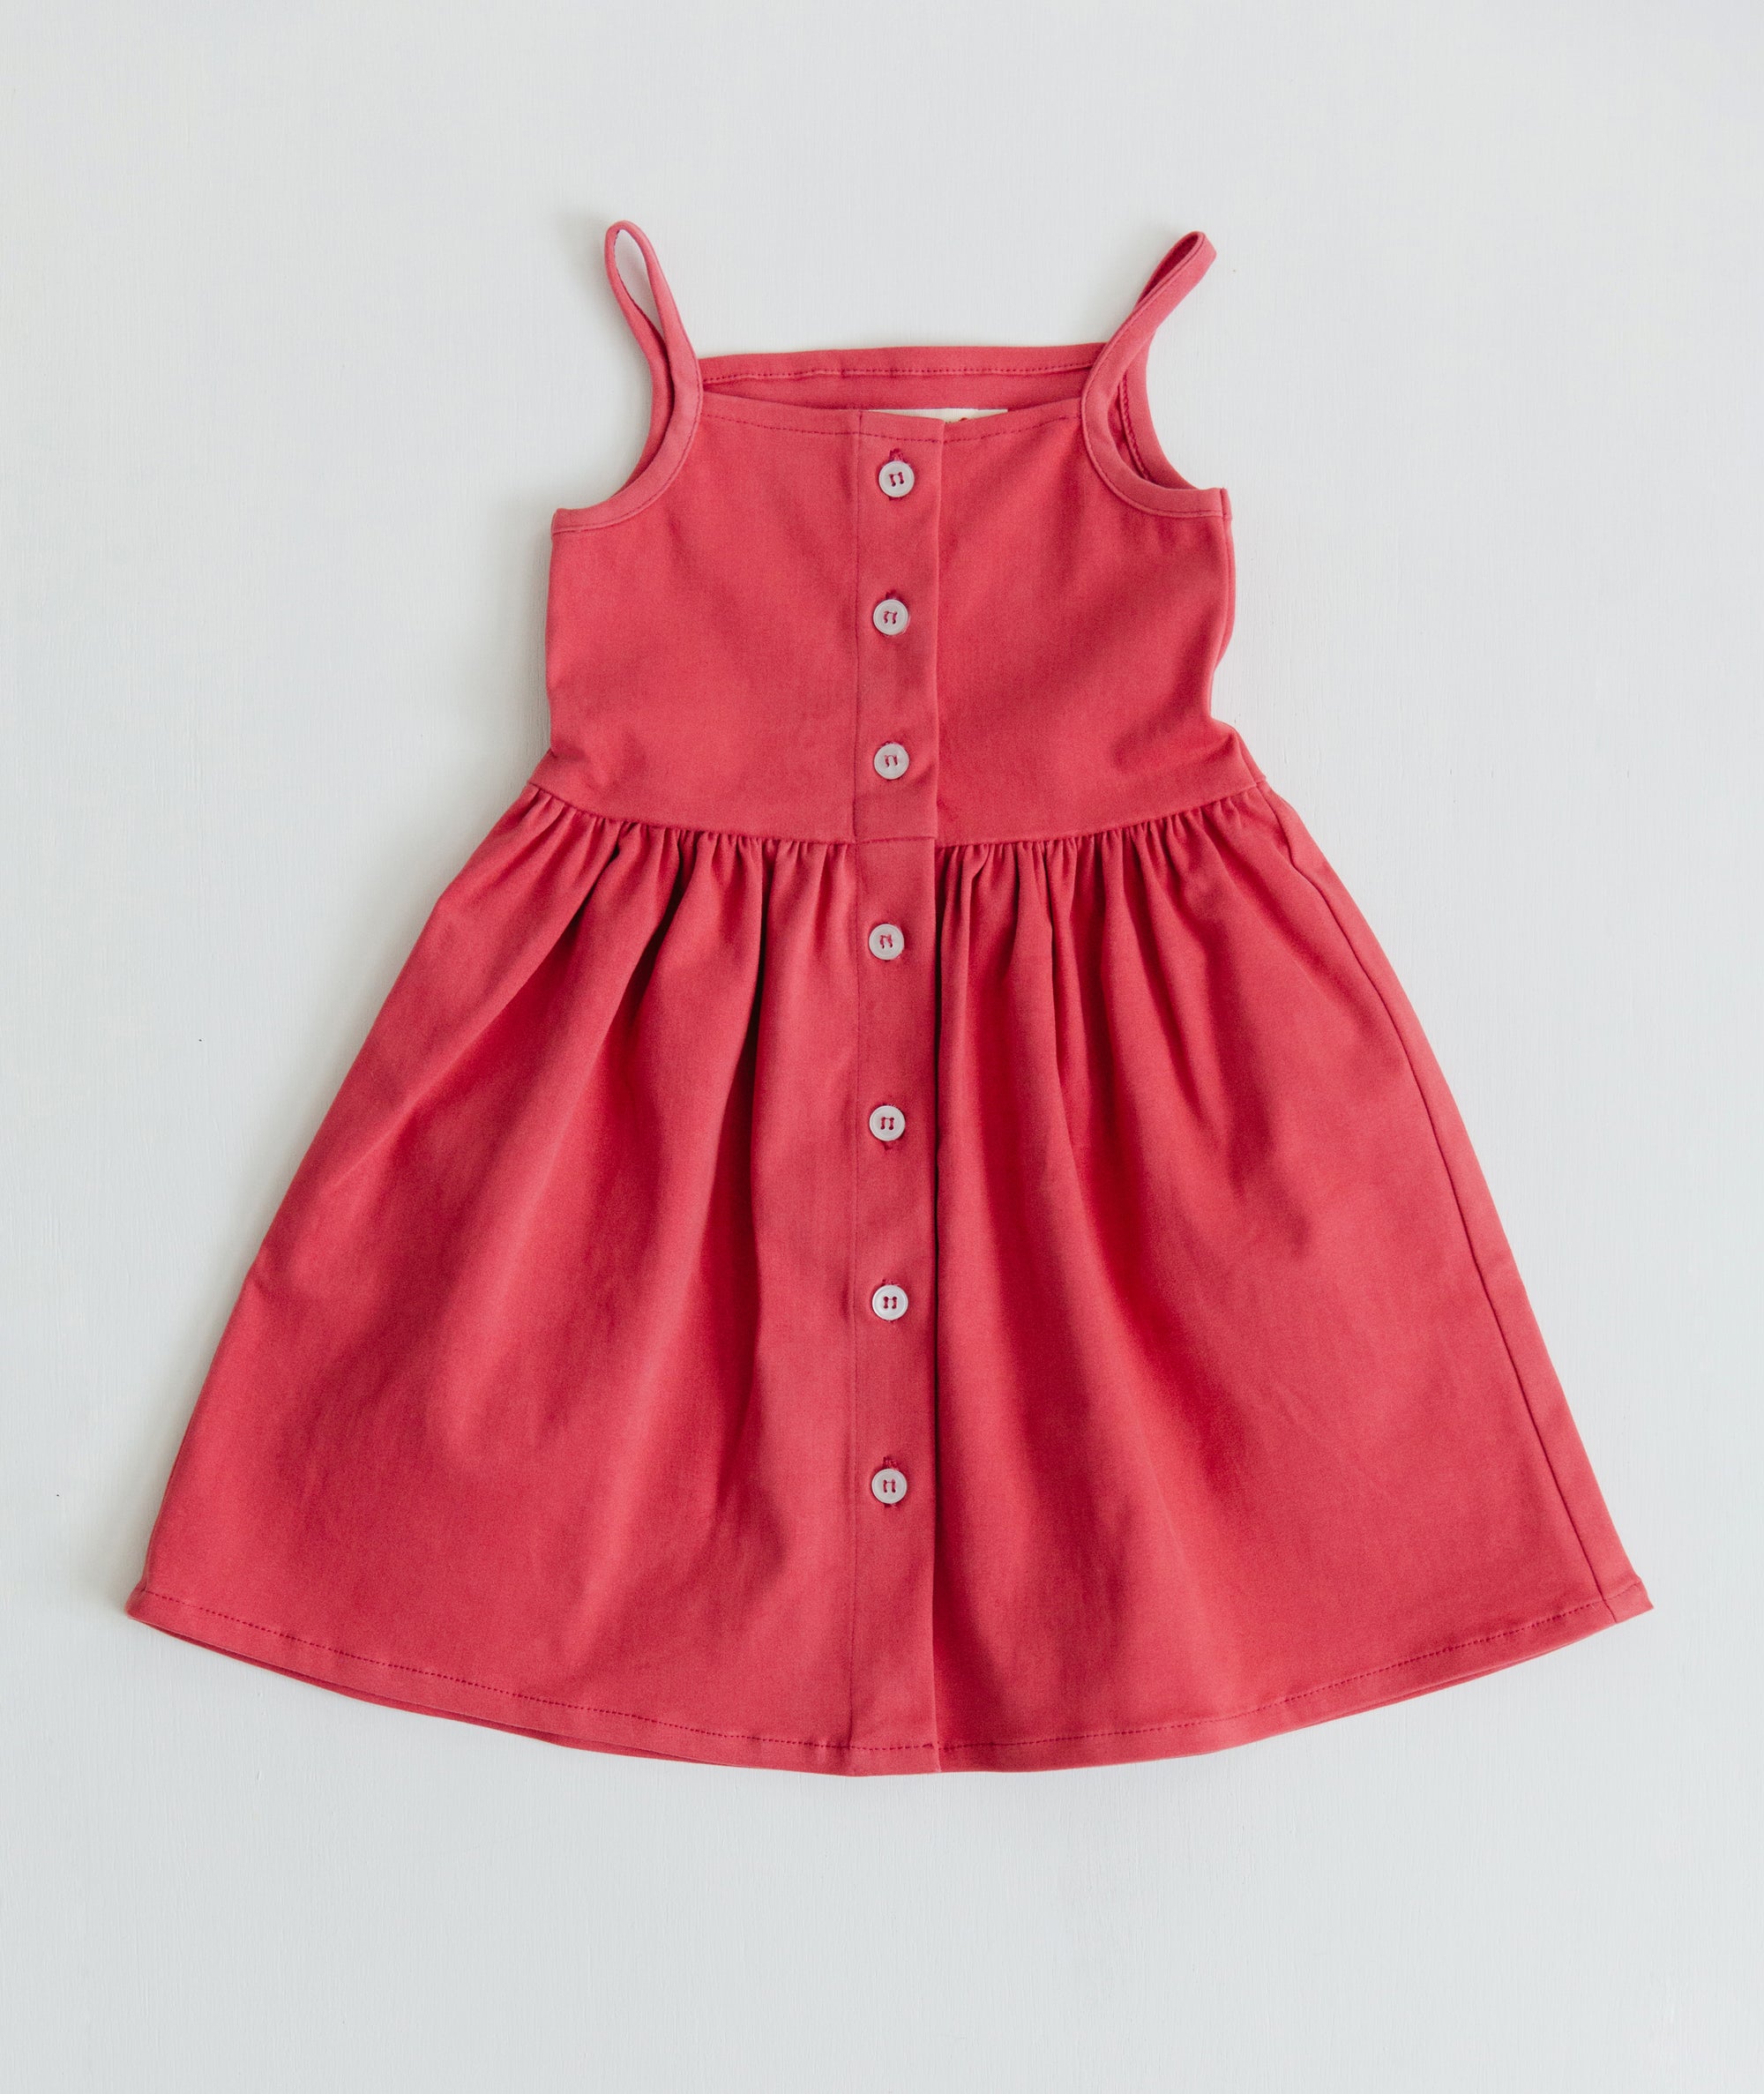 The Heather Dress in Rosy Red